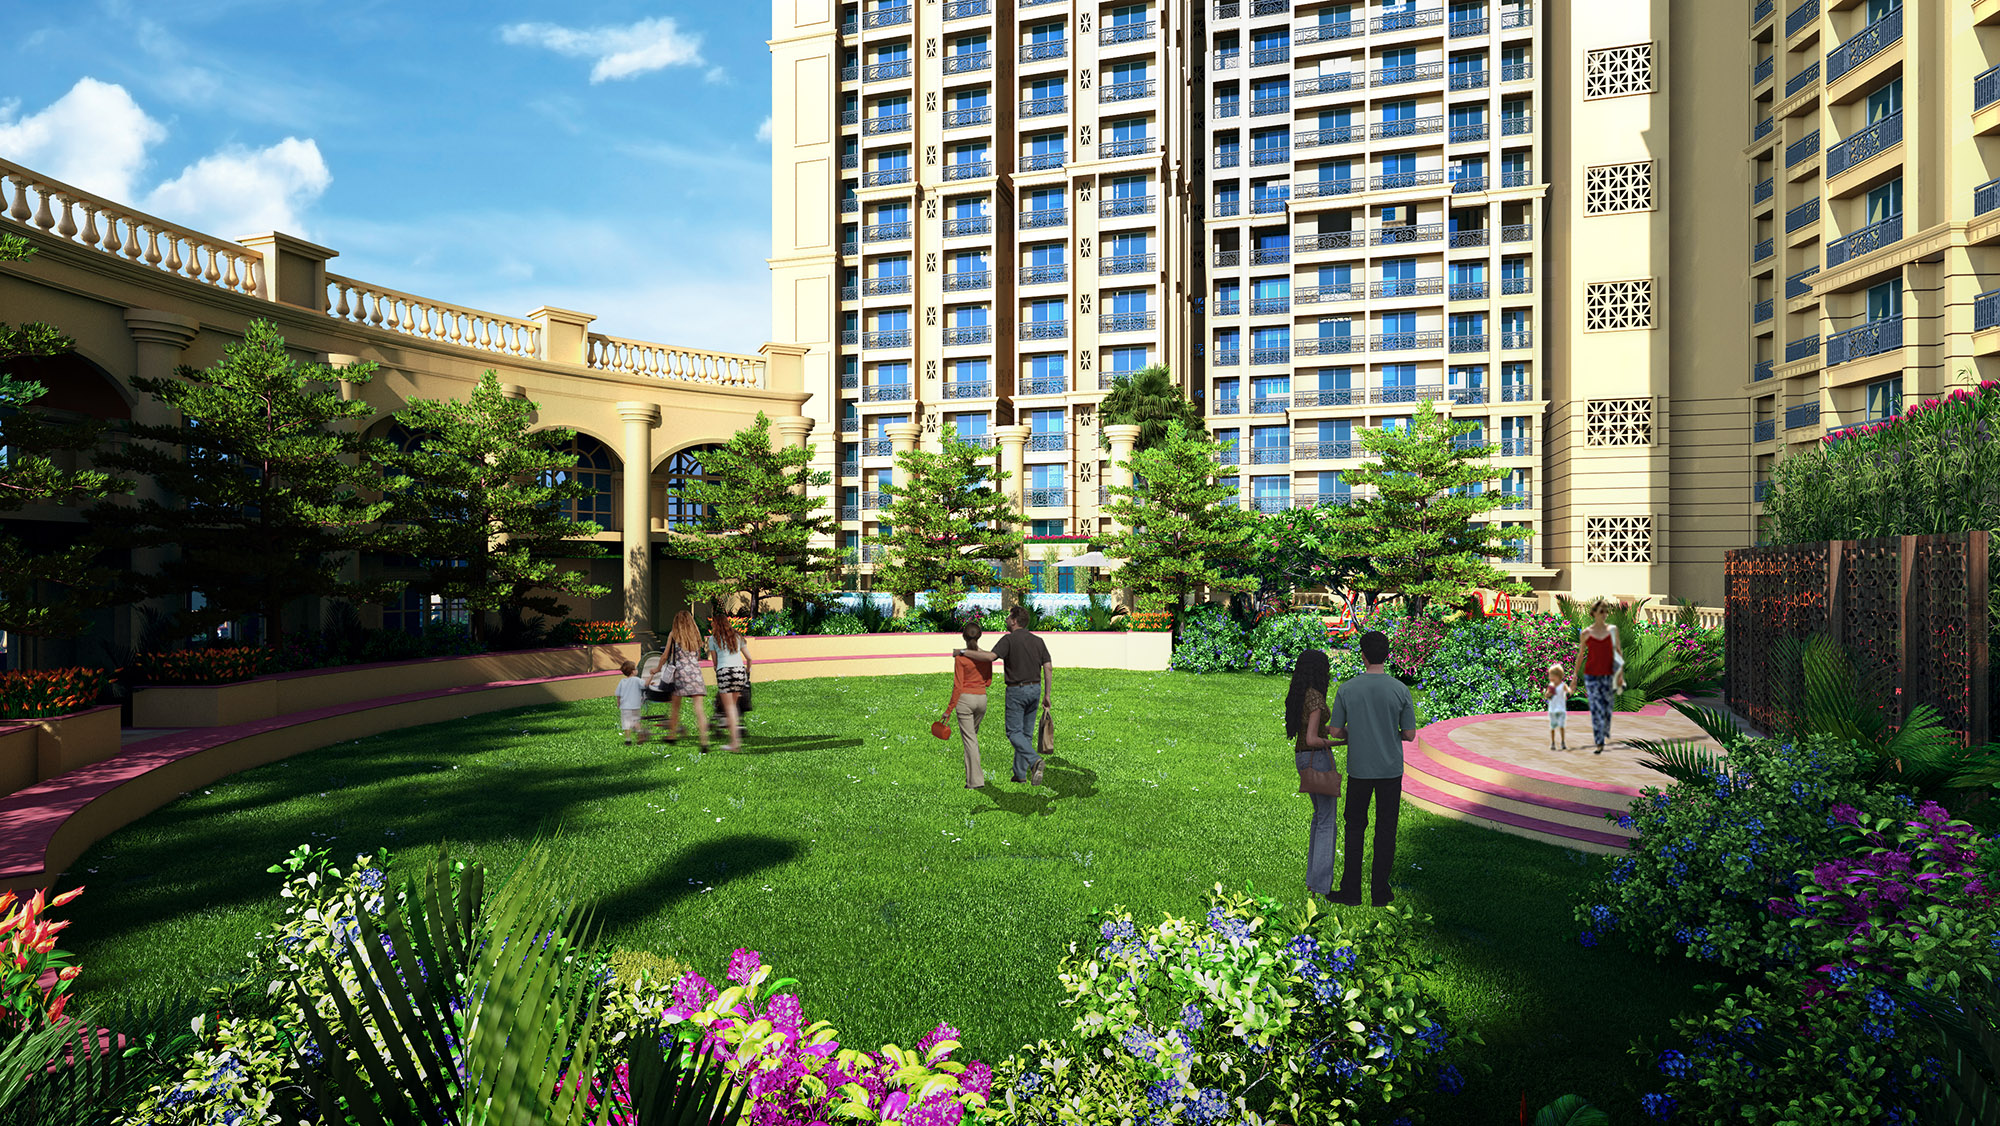 Siddhi Group Highland Spring Residential 2BHK 1BHK Flats in Thane